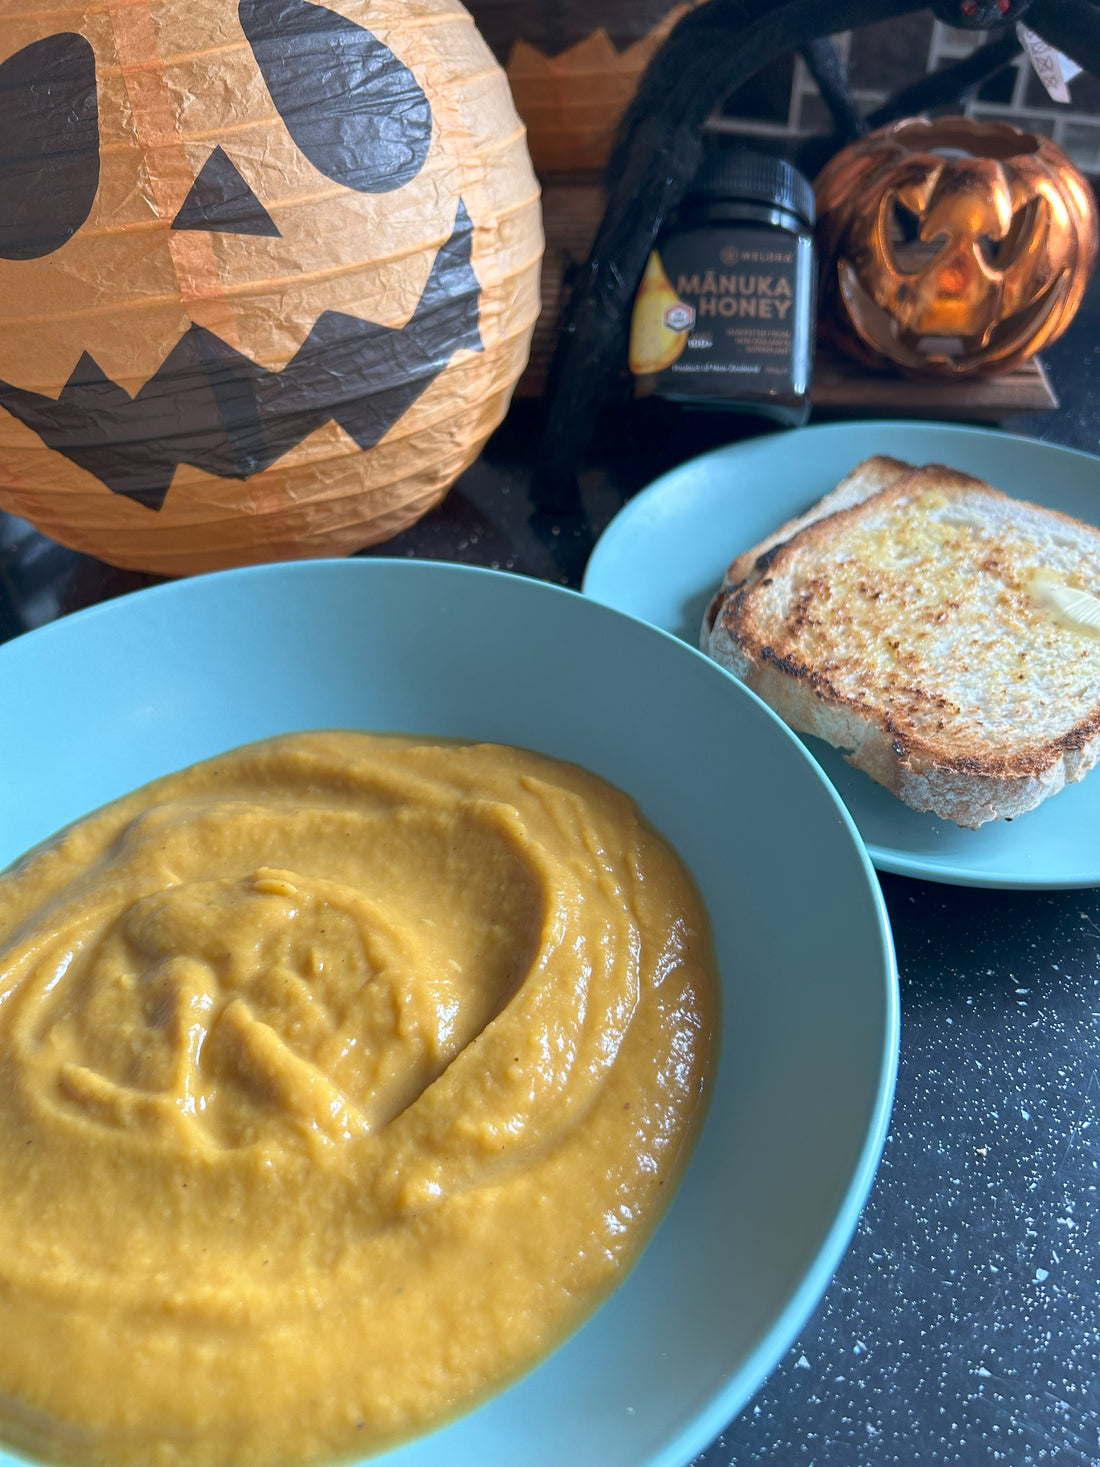 Dive into the Season with our Melora Manuka Honey Butternut Squash Soup!